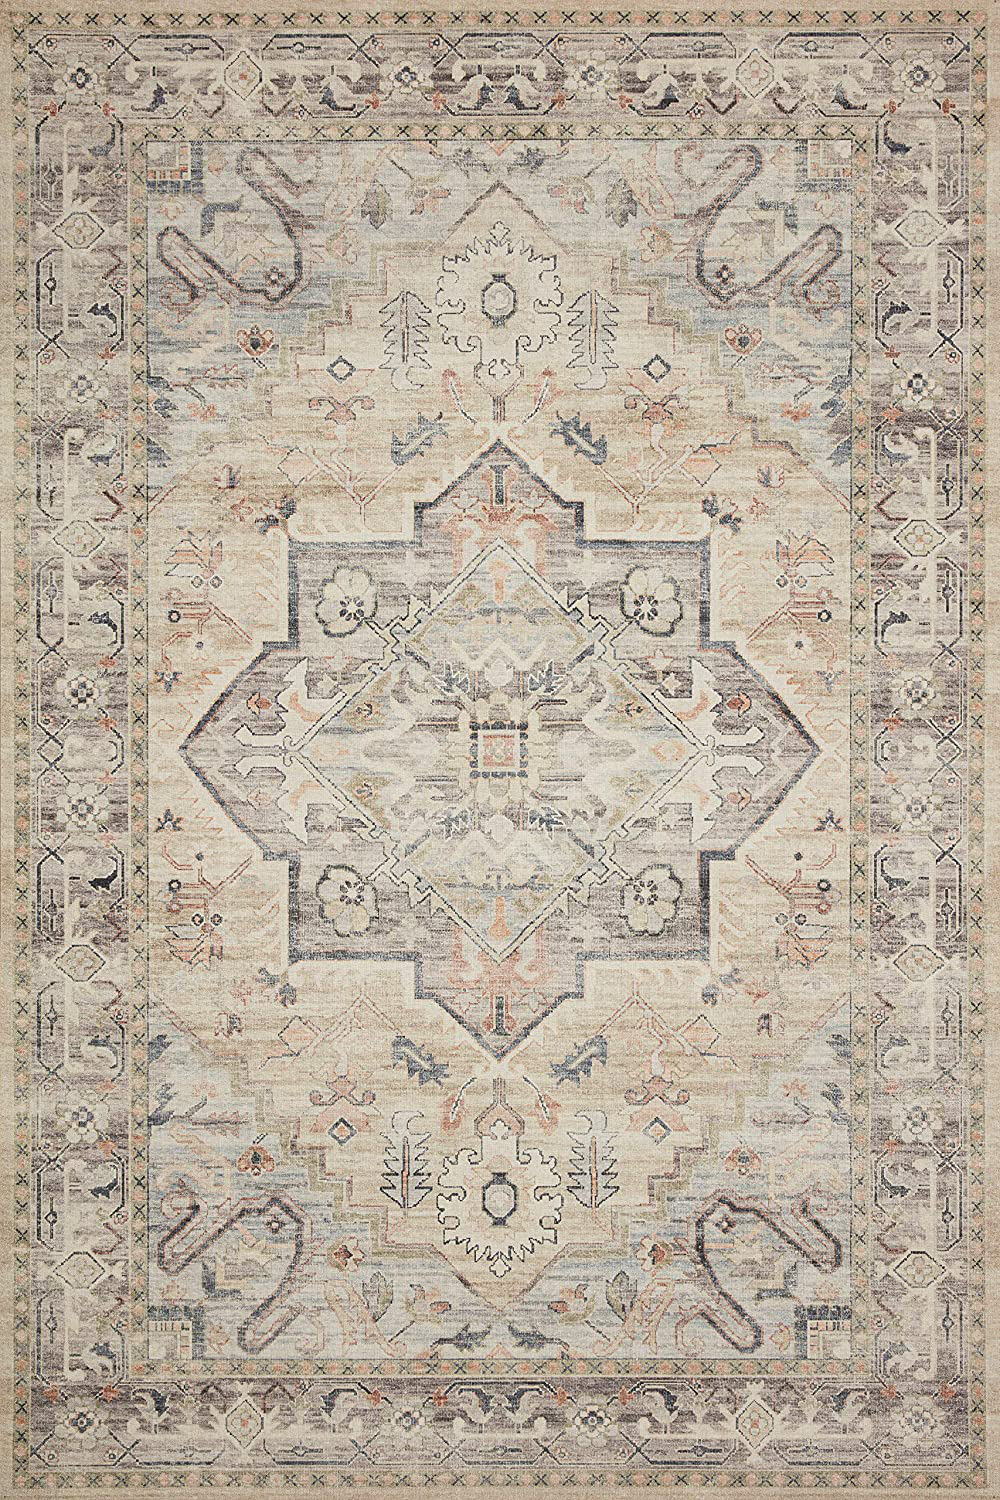 Loloi II Hathaway Collection HTH-02 Denim / Multi, Traditional Runner Rug, 2'-6" x 7'-6"